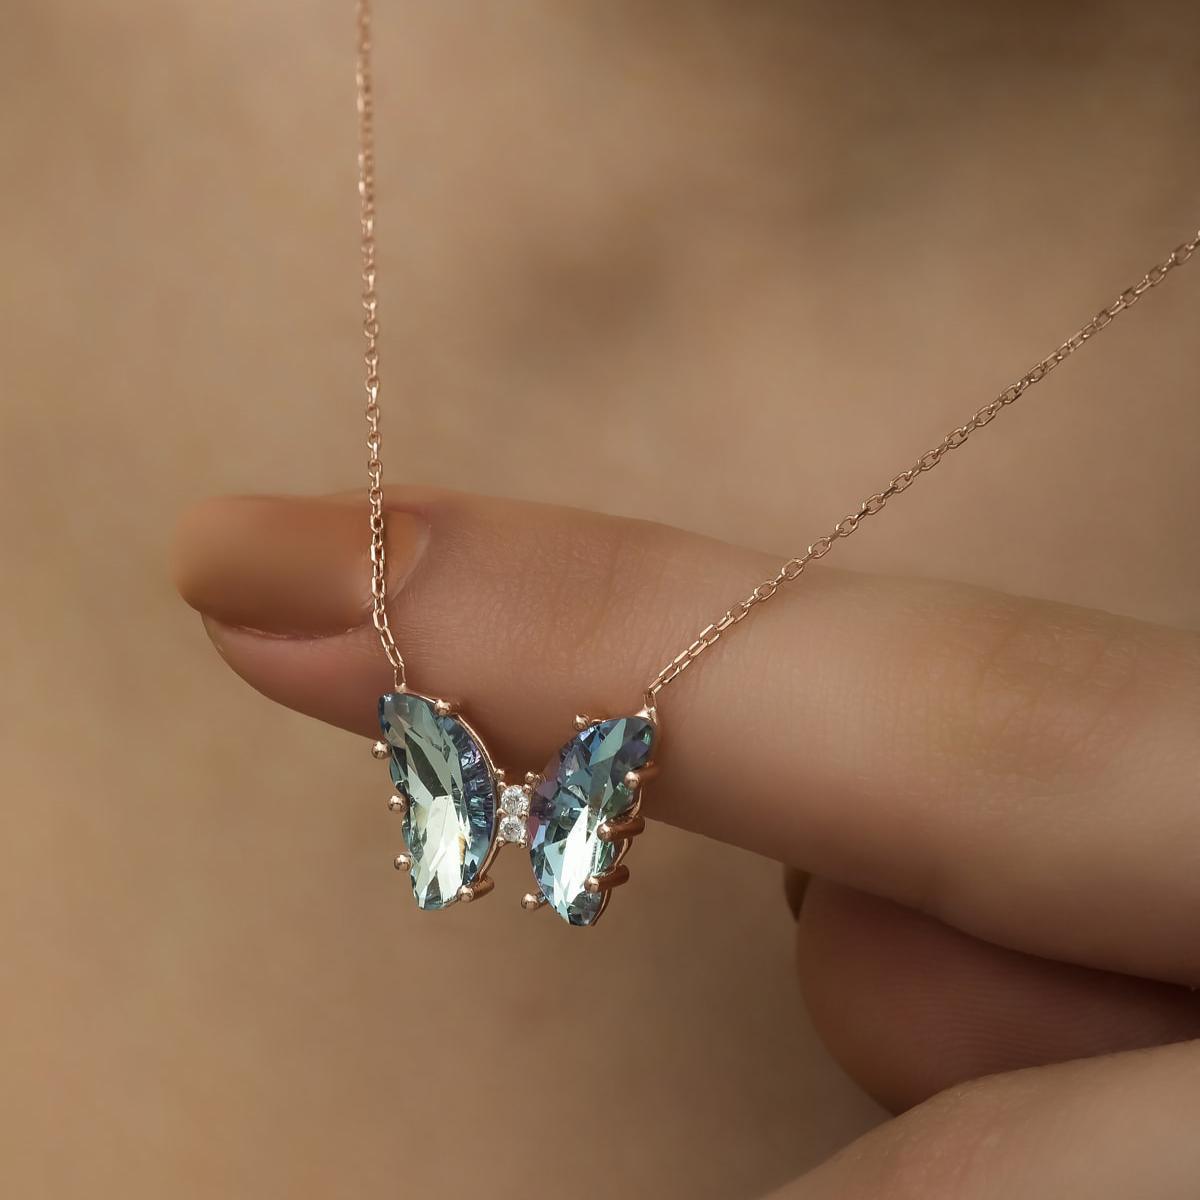 Blue Aquamarine Butterfly Necklace • Aquamarine Birthstone Necklace - Trending Silver Gifts